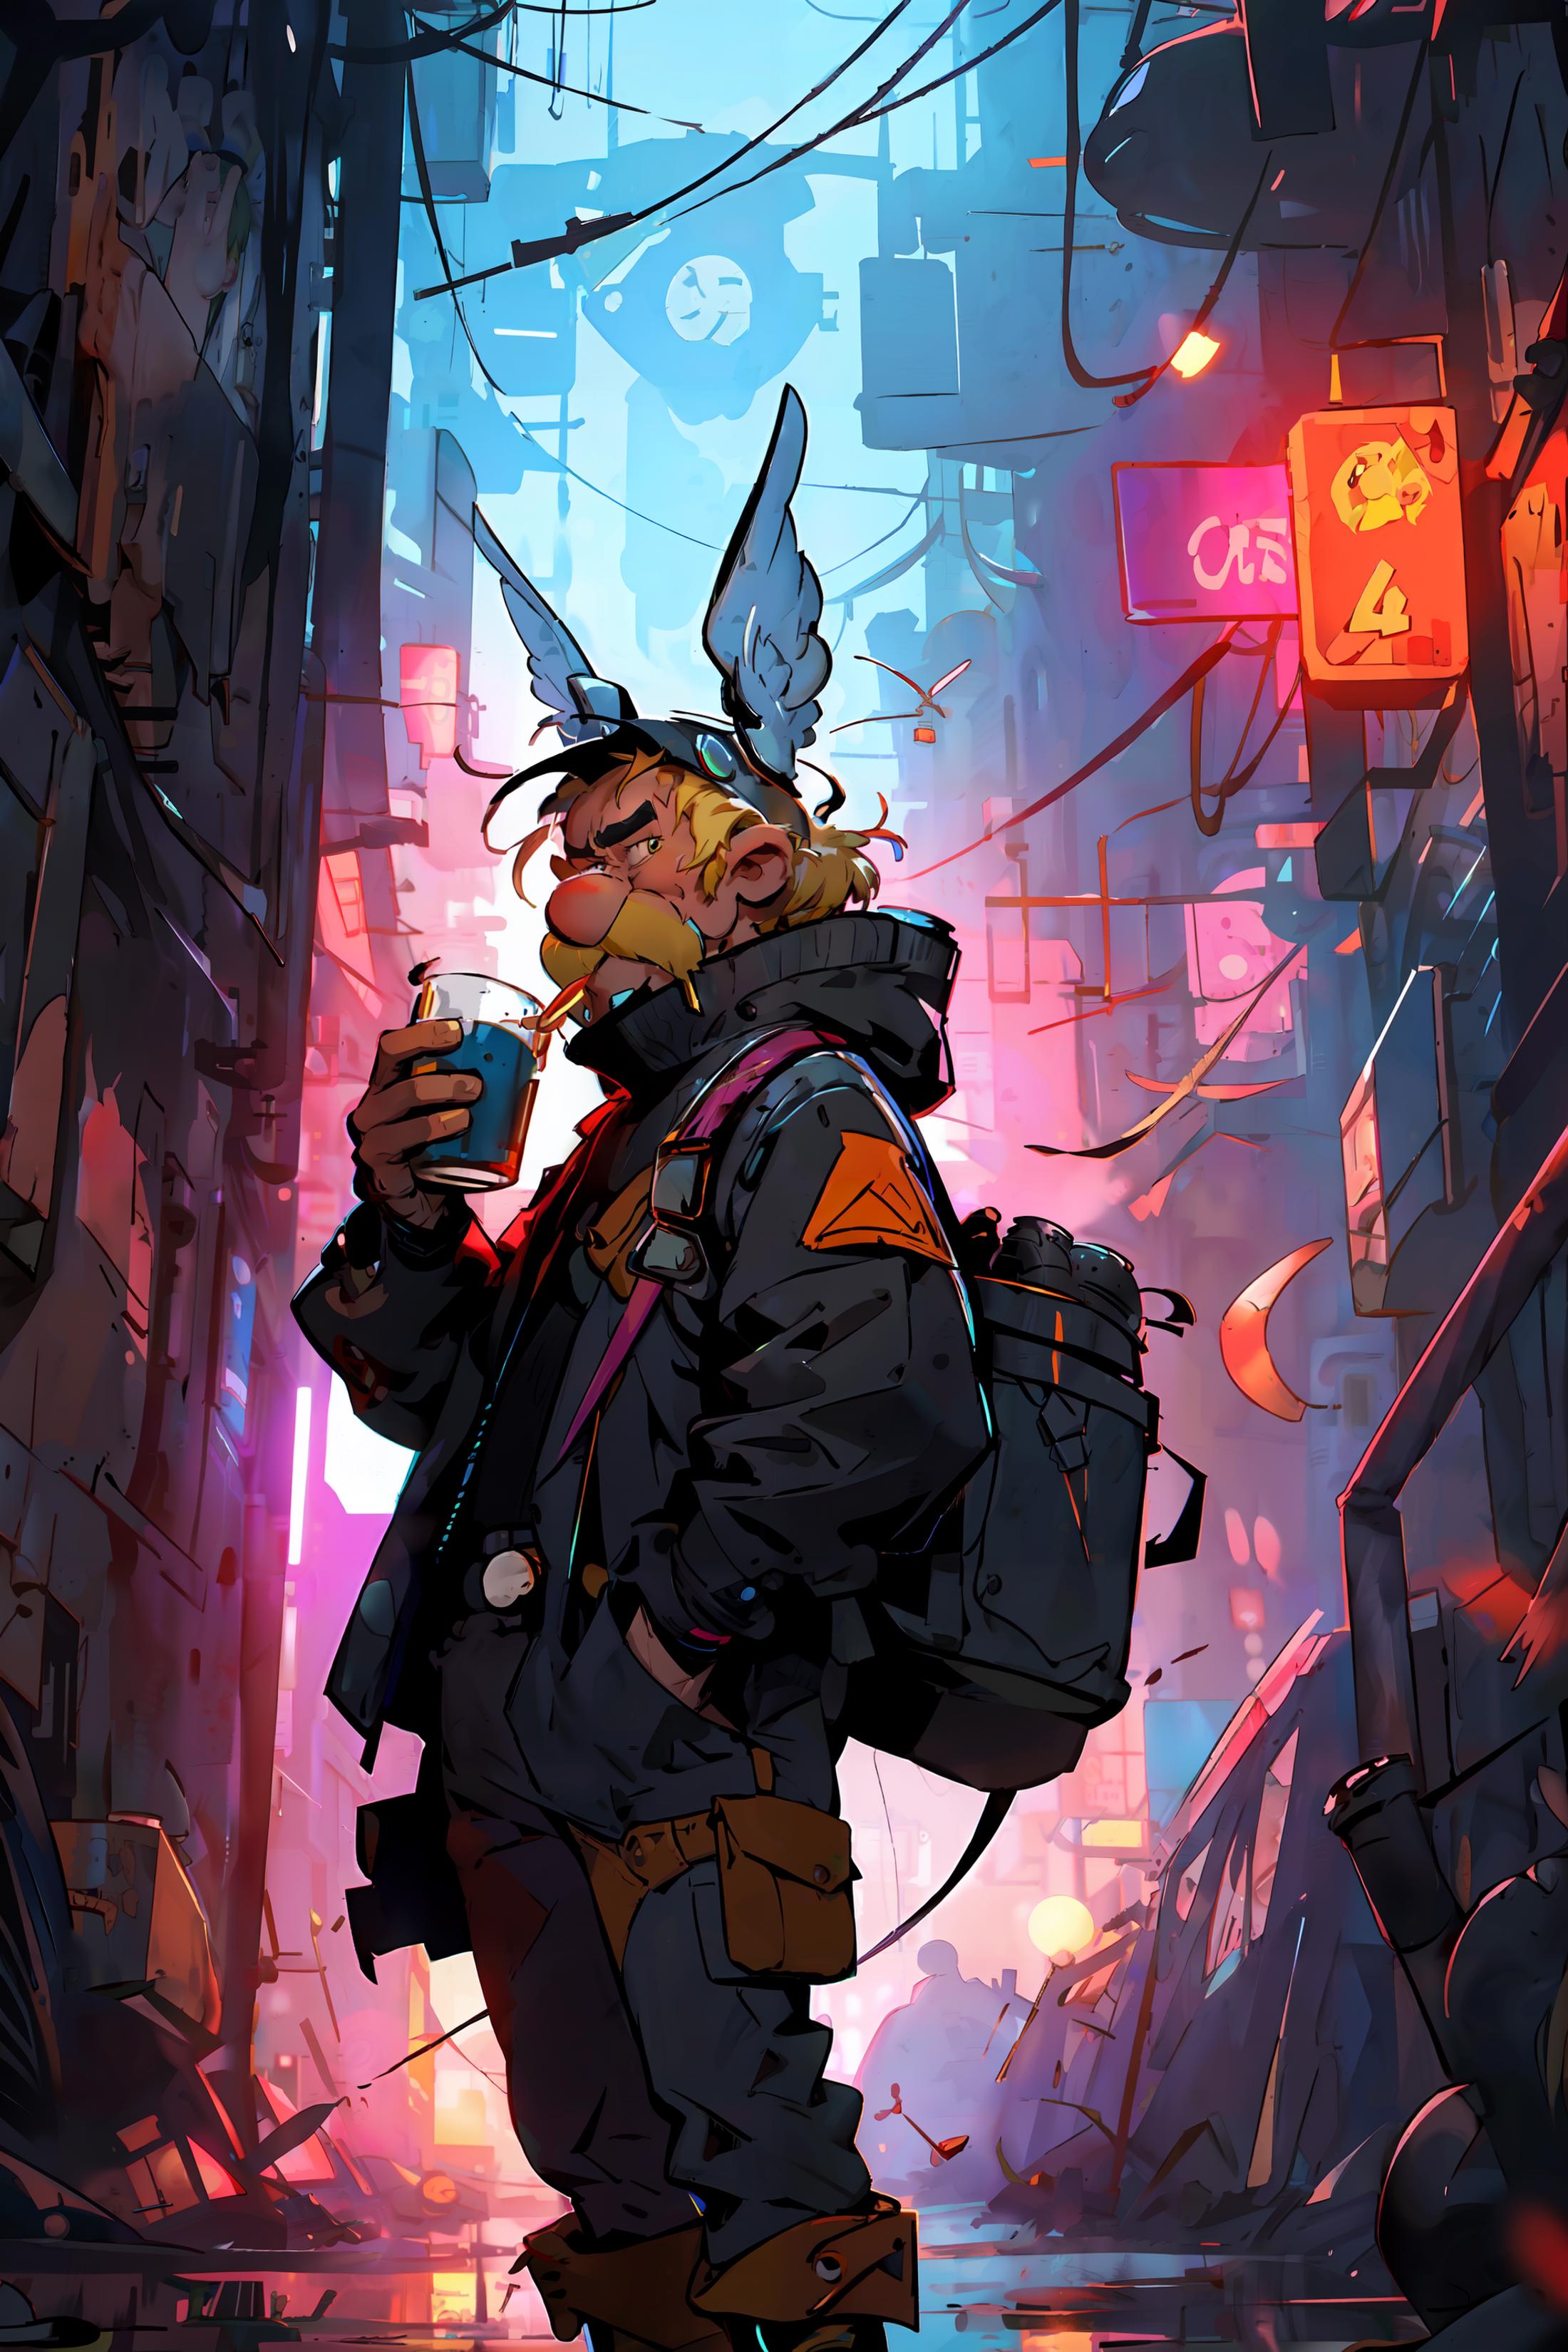 A man wearing a blue jacket and a hat with horns, holding a drink and a backpack in a city setting.